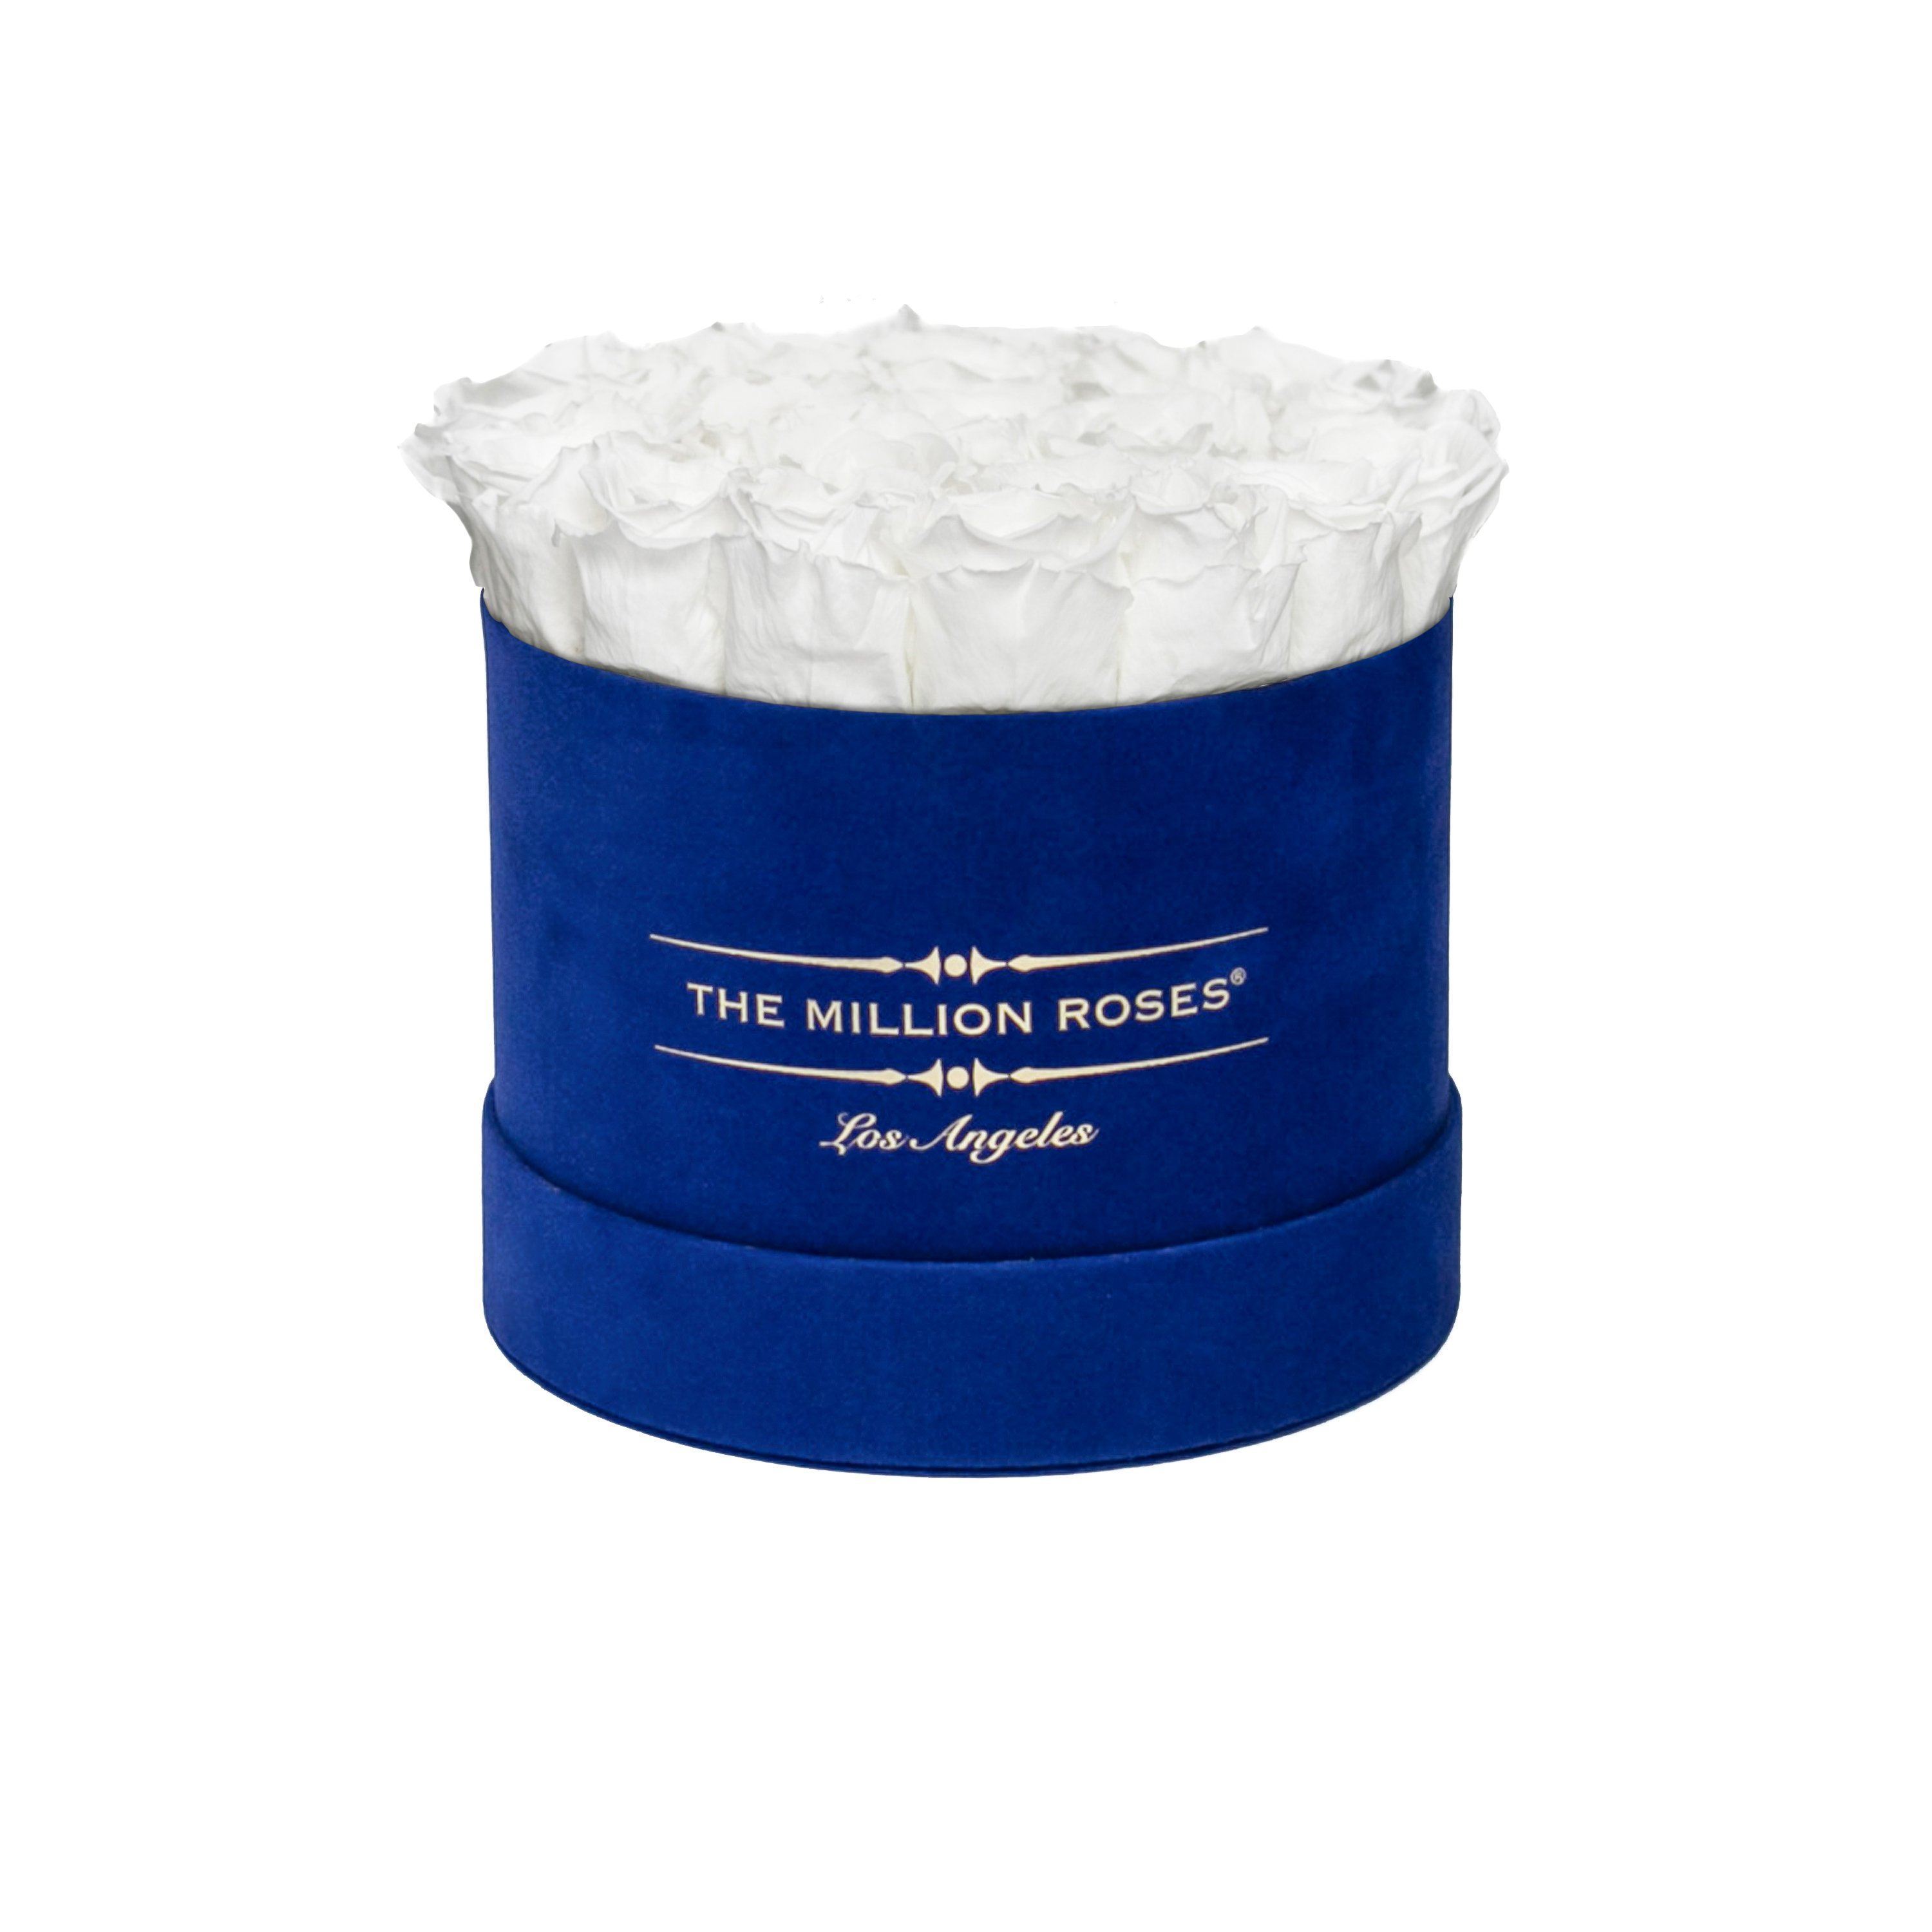 classic round box - royal-blue suede box - white roses white eternity roses - the million roses